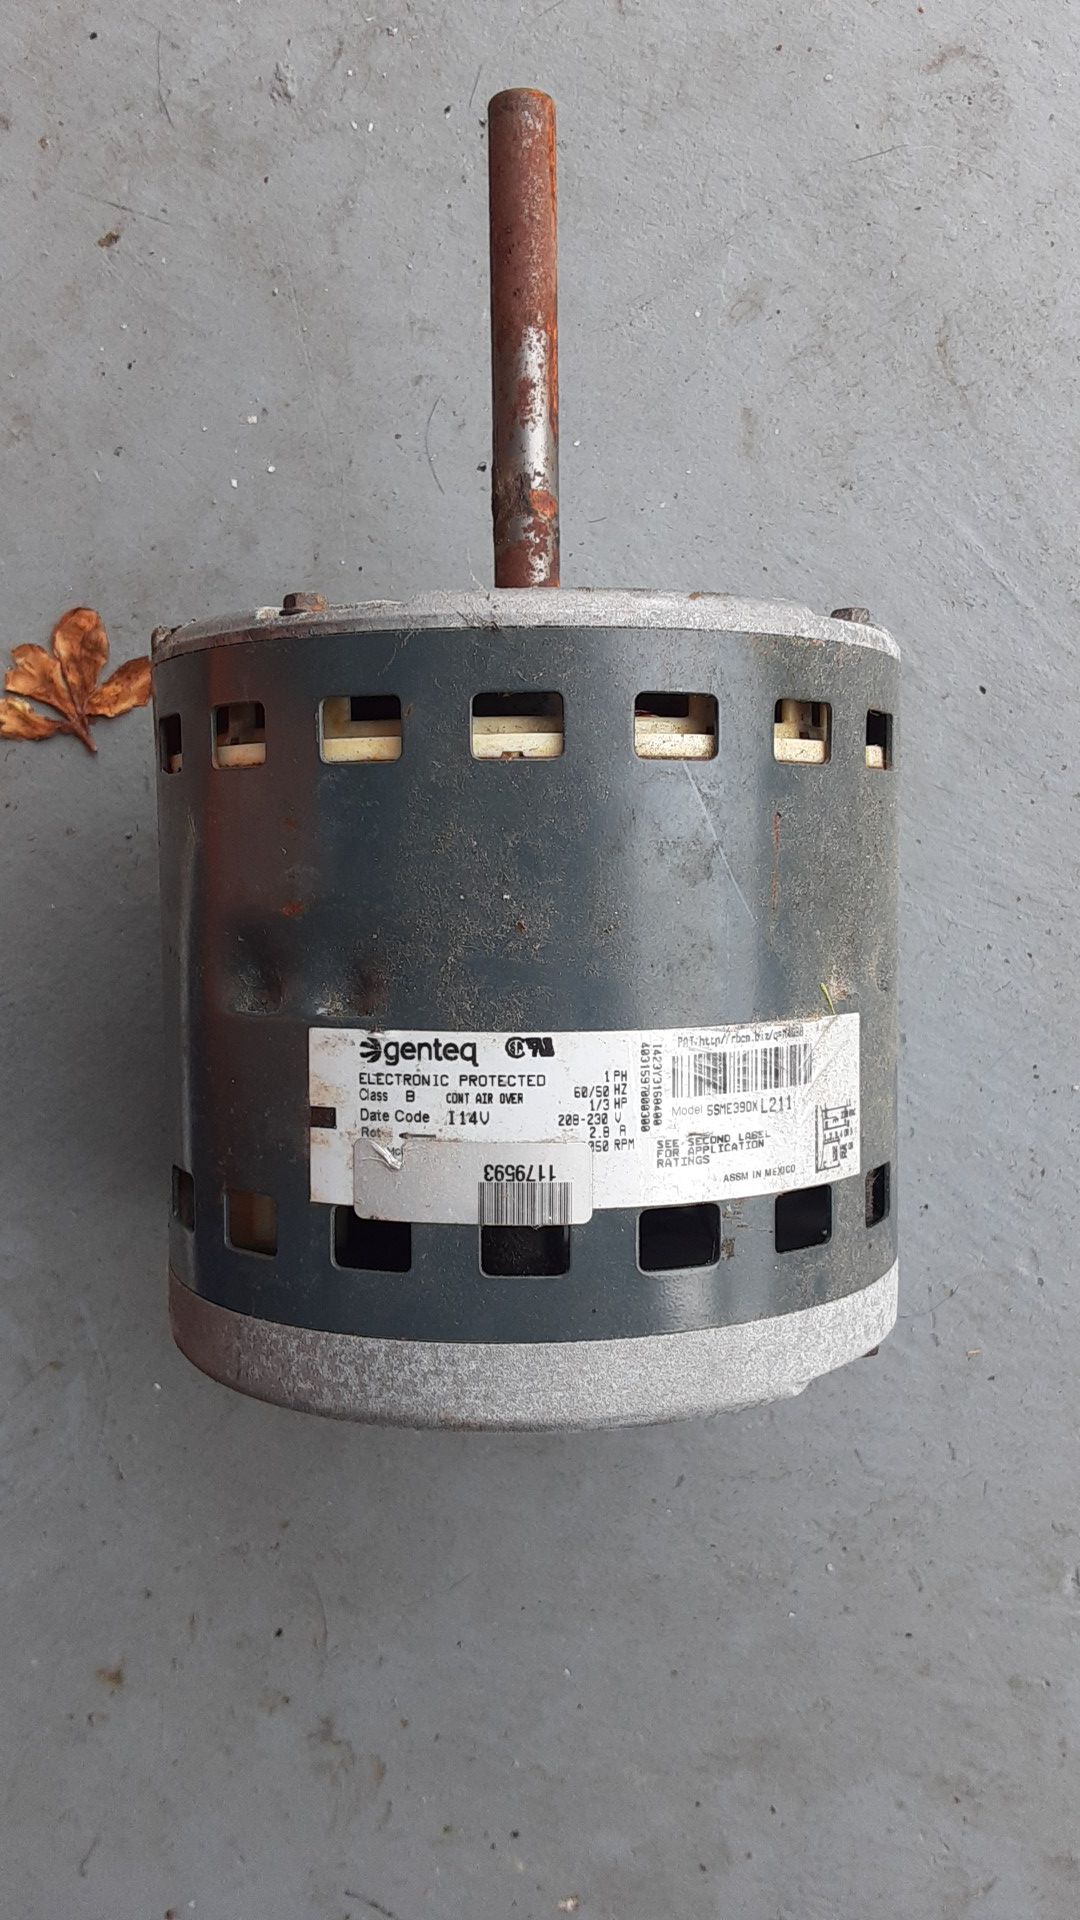 Genteq 3/4 hp motor. Never used just sat in a box